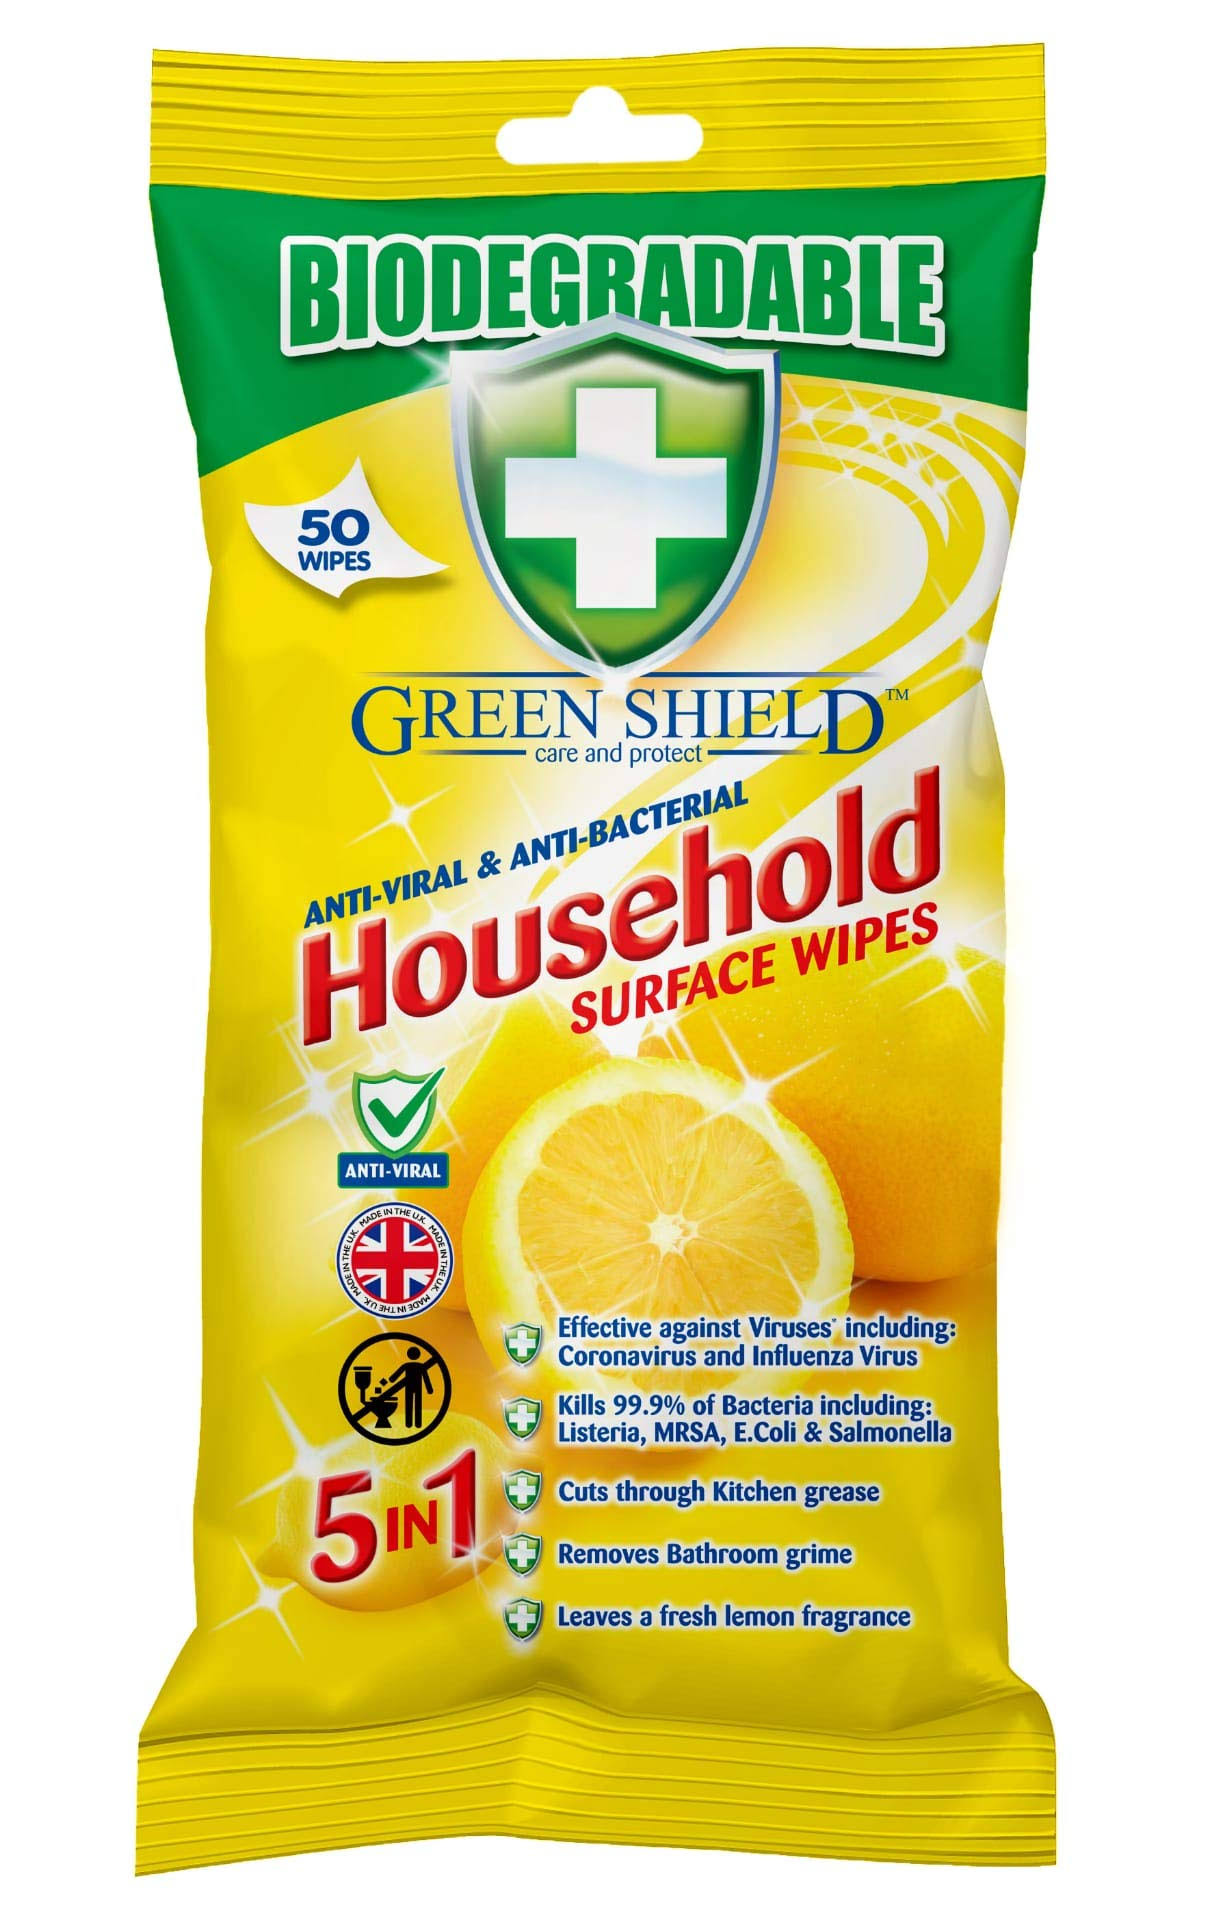 Greenshield Biodegradable Antiviral and Anti-Bacterial Surface Wipes for Home, 50 Wipes